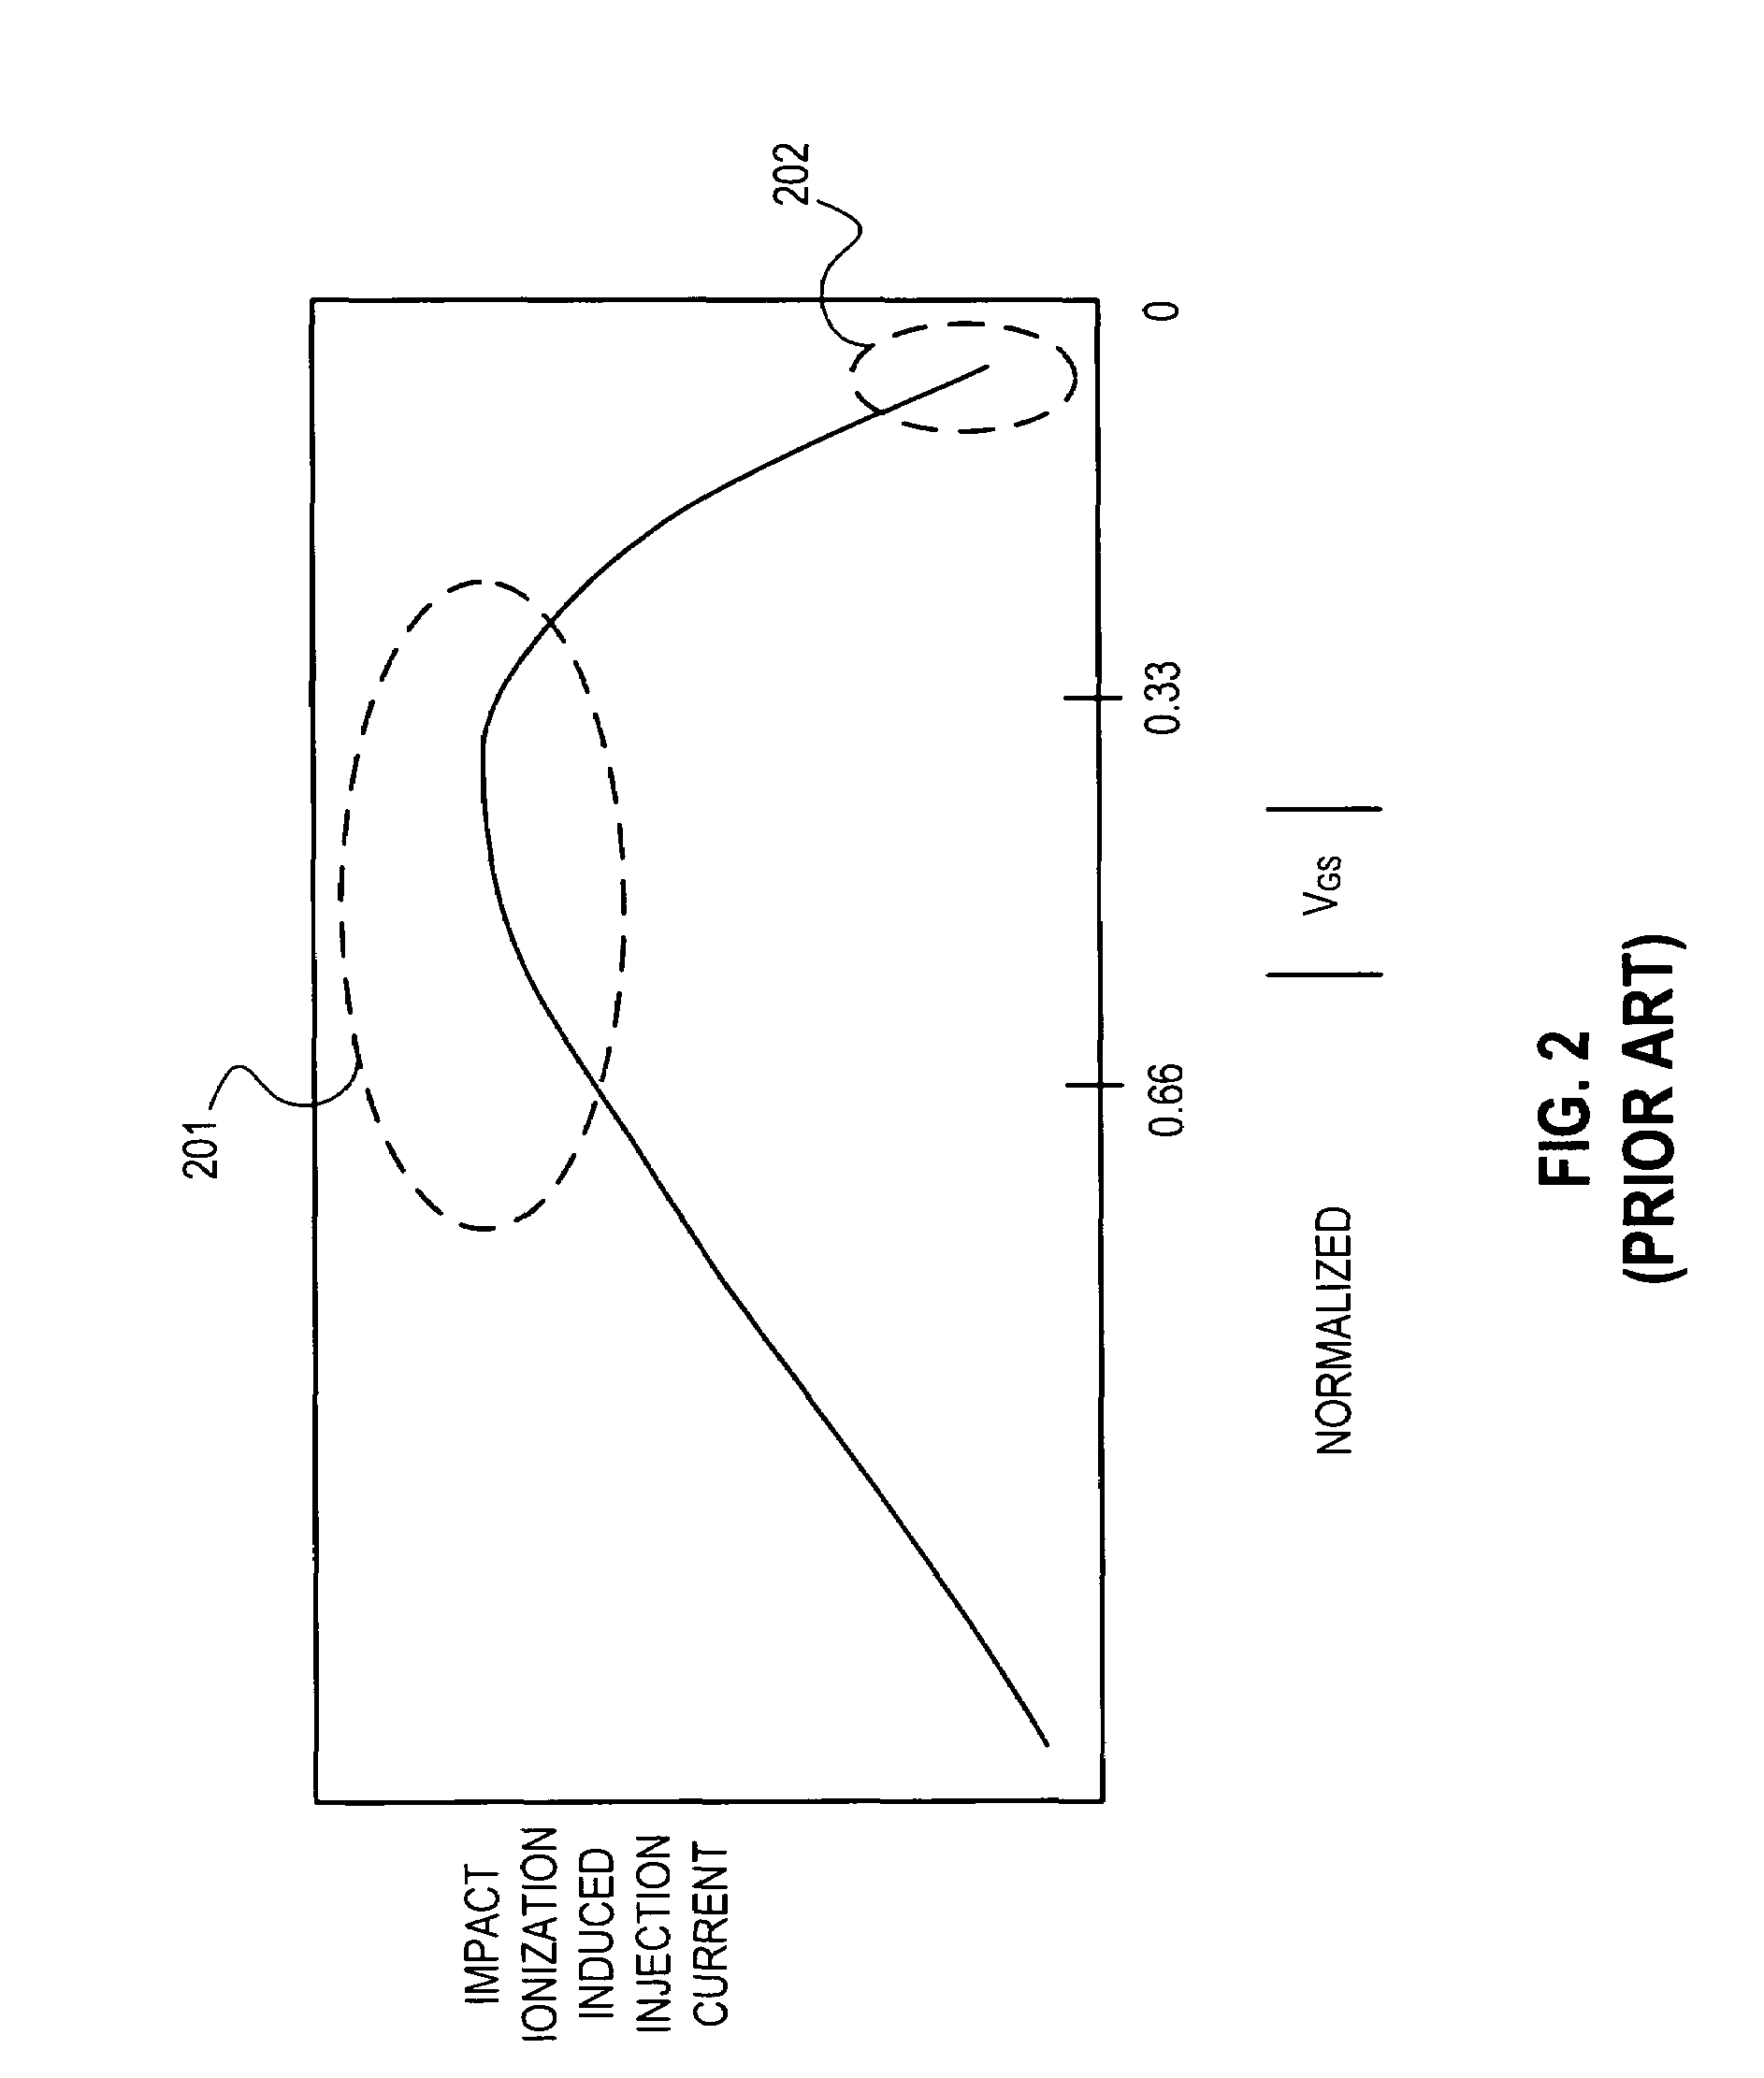 Non-volatile memory cell circuit with programming through band-to-band tunneling and impact ionization gate current